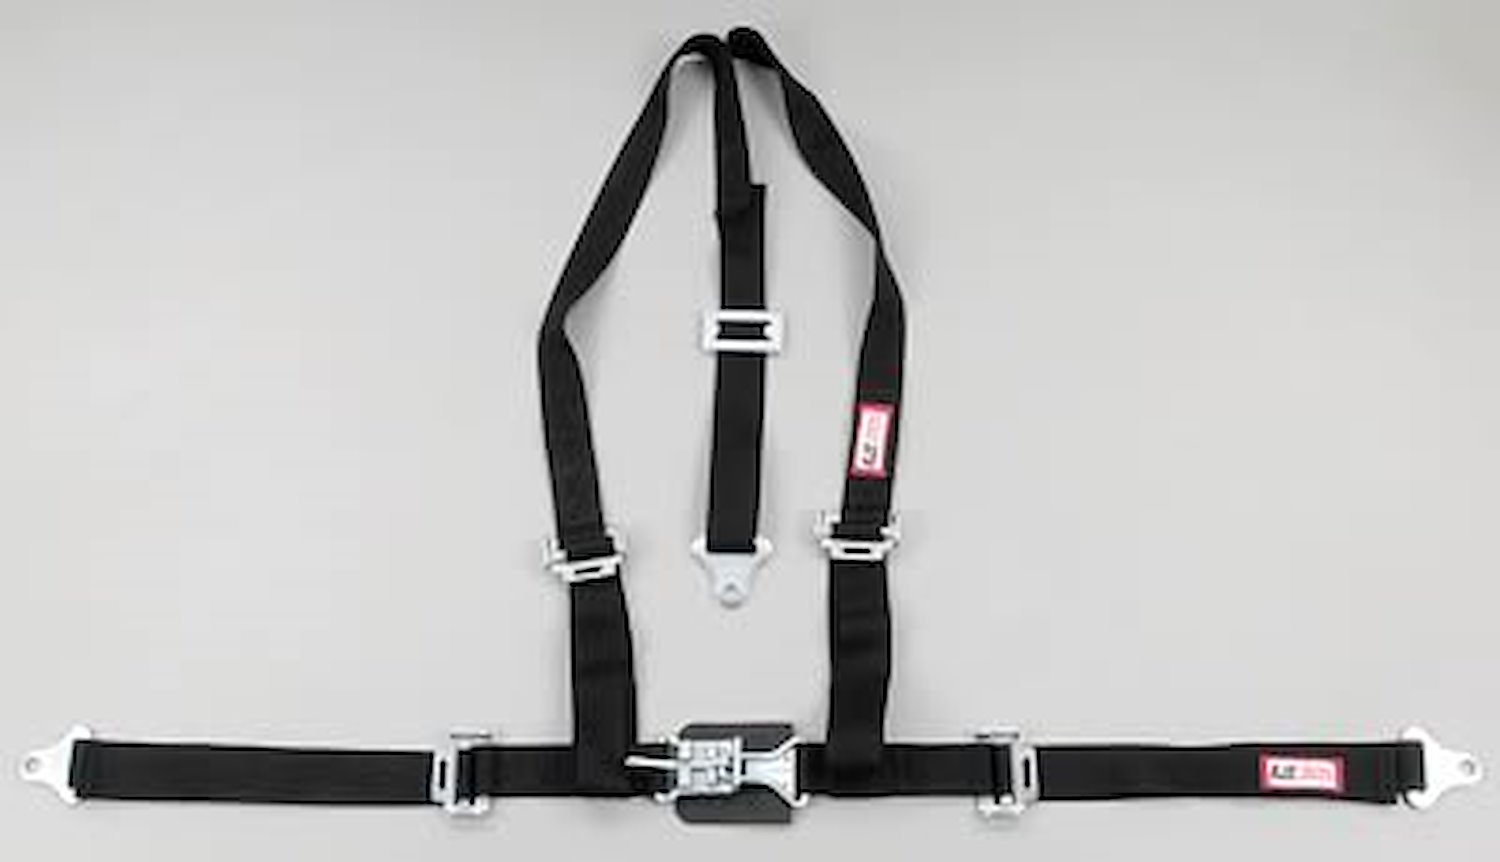 NON-SFI L&L HARNESS 2 PULL DOWN Lap Belt SEWN IN 2 S.H. INDIVIDUAL FLOOR Mount w/STERNUM STRAP ALL WRAP ENDS ORANGE